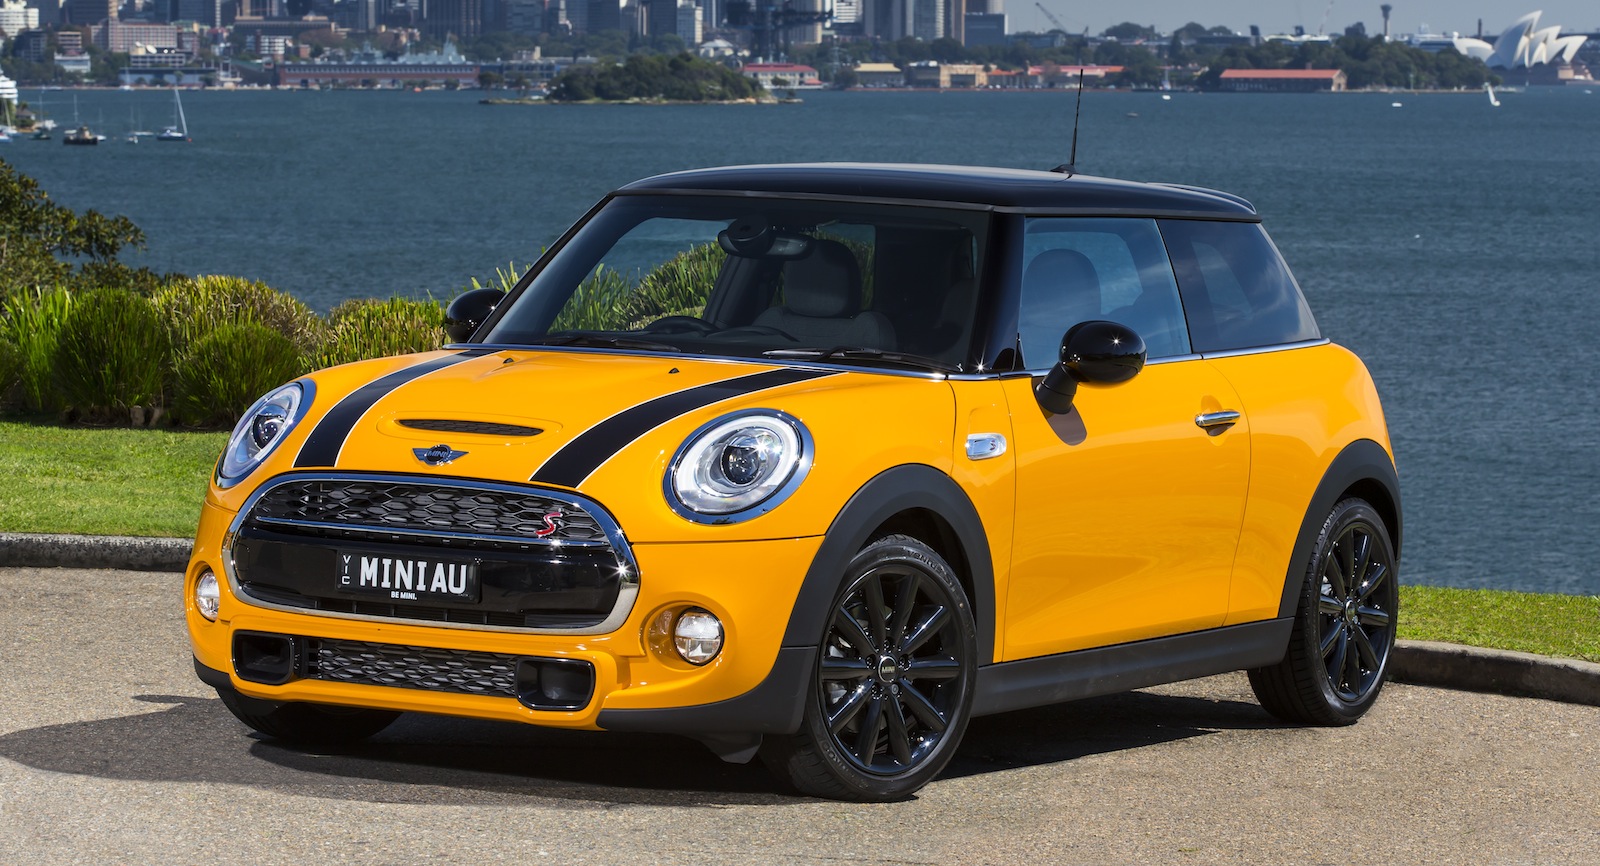 2014 Mini Cooper pricing and specifications - Photos (1 of 14)